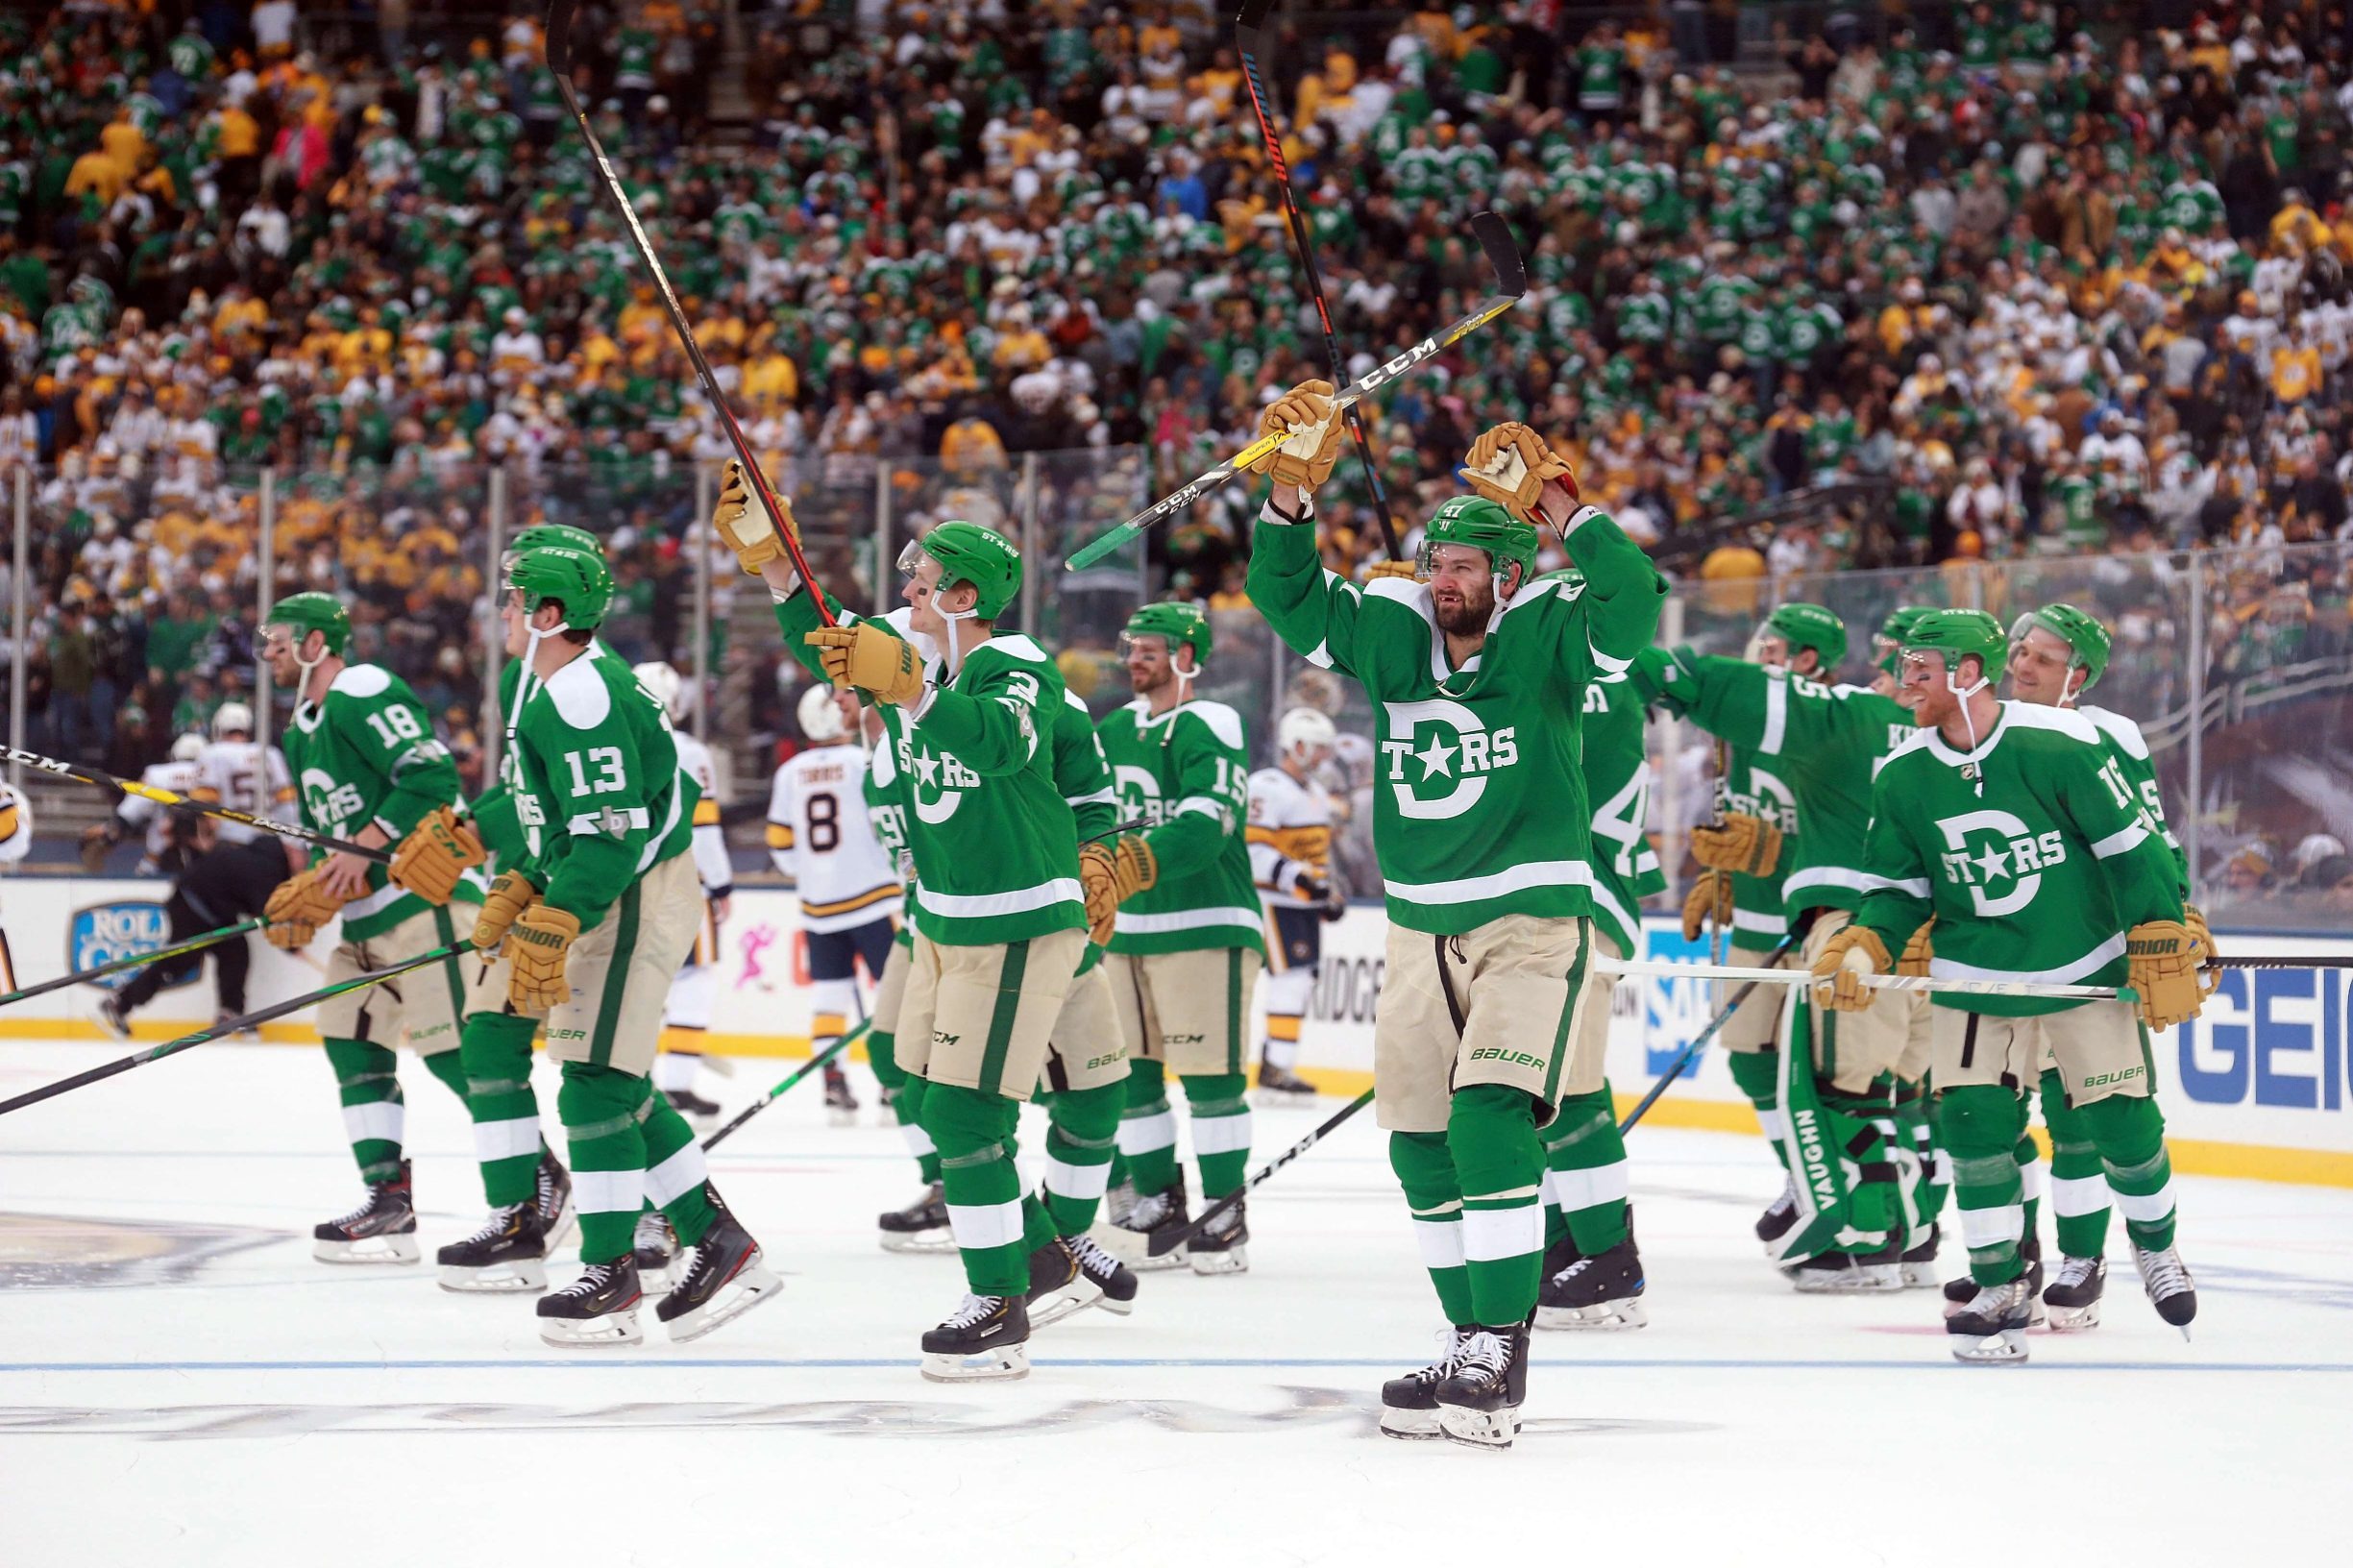 DALLAS, TEXAS - JANUARY 01: The Dallas Stars celebrate the 4-2 win over the Nashville Predators in the NHL Winter Classic at the Cotton Bowl on January 01, 2020 in Dallas, Texas.   Richard Rodriguez/Getty Images/AFP
== FOR NEWSPAPERS, INTERNET, TELCOS & TELEVISION USE ONLY ==